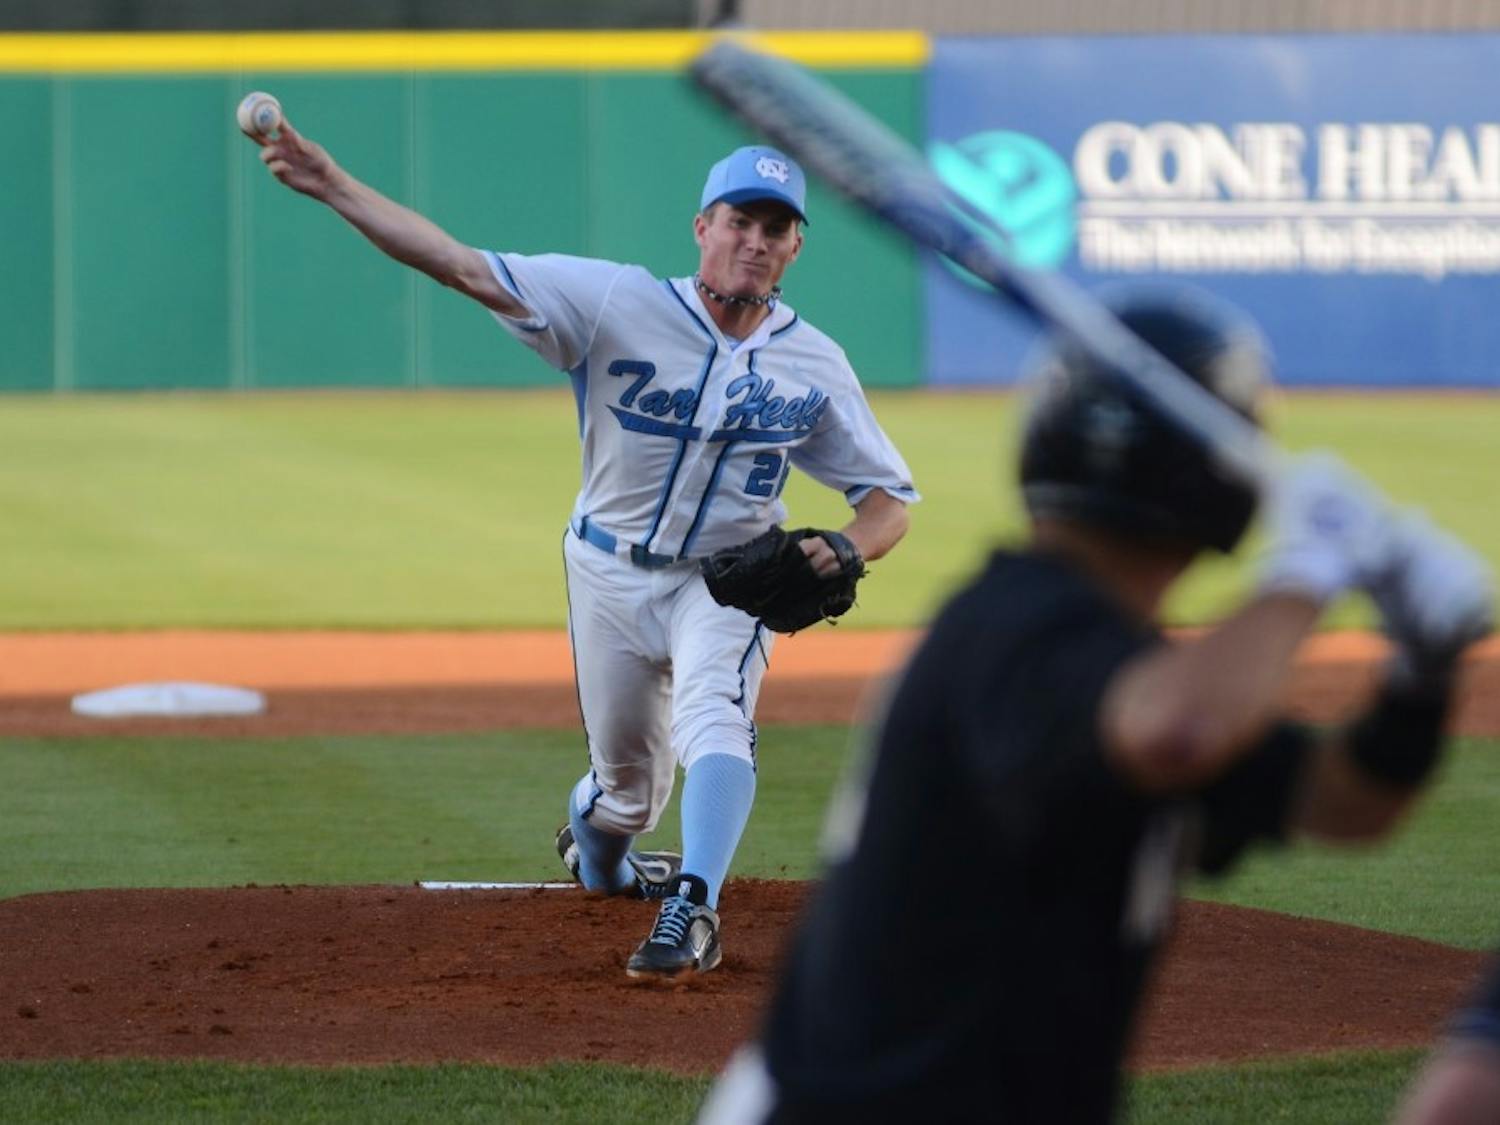 	The North Carolina Tar Heels defeated The Wake Forest Demon Deacons 6-0 in their opening game of the 2012 ACC Baseball Tournament on May 23rd, 2012 at NewBridge Bank Park in Greensboro, North Carolina.